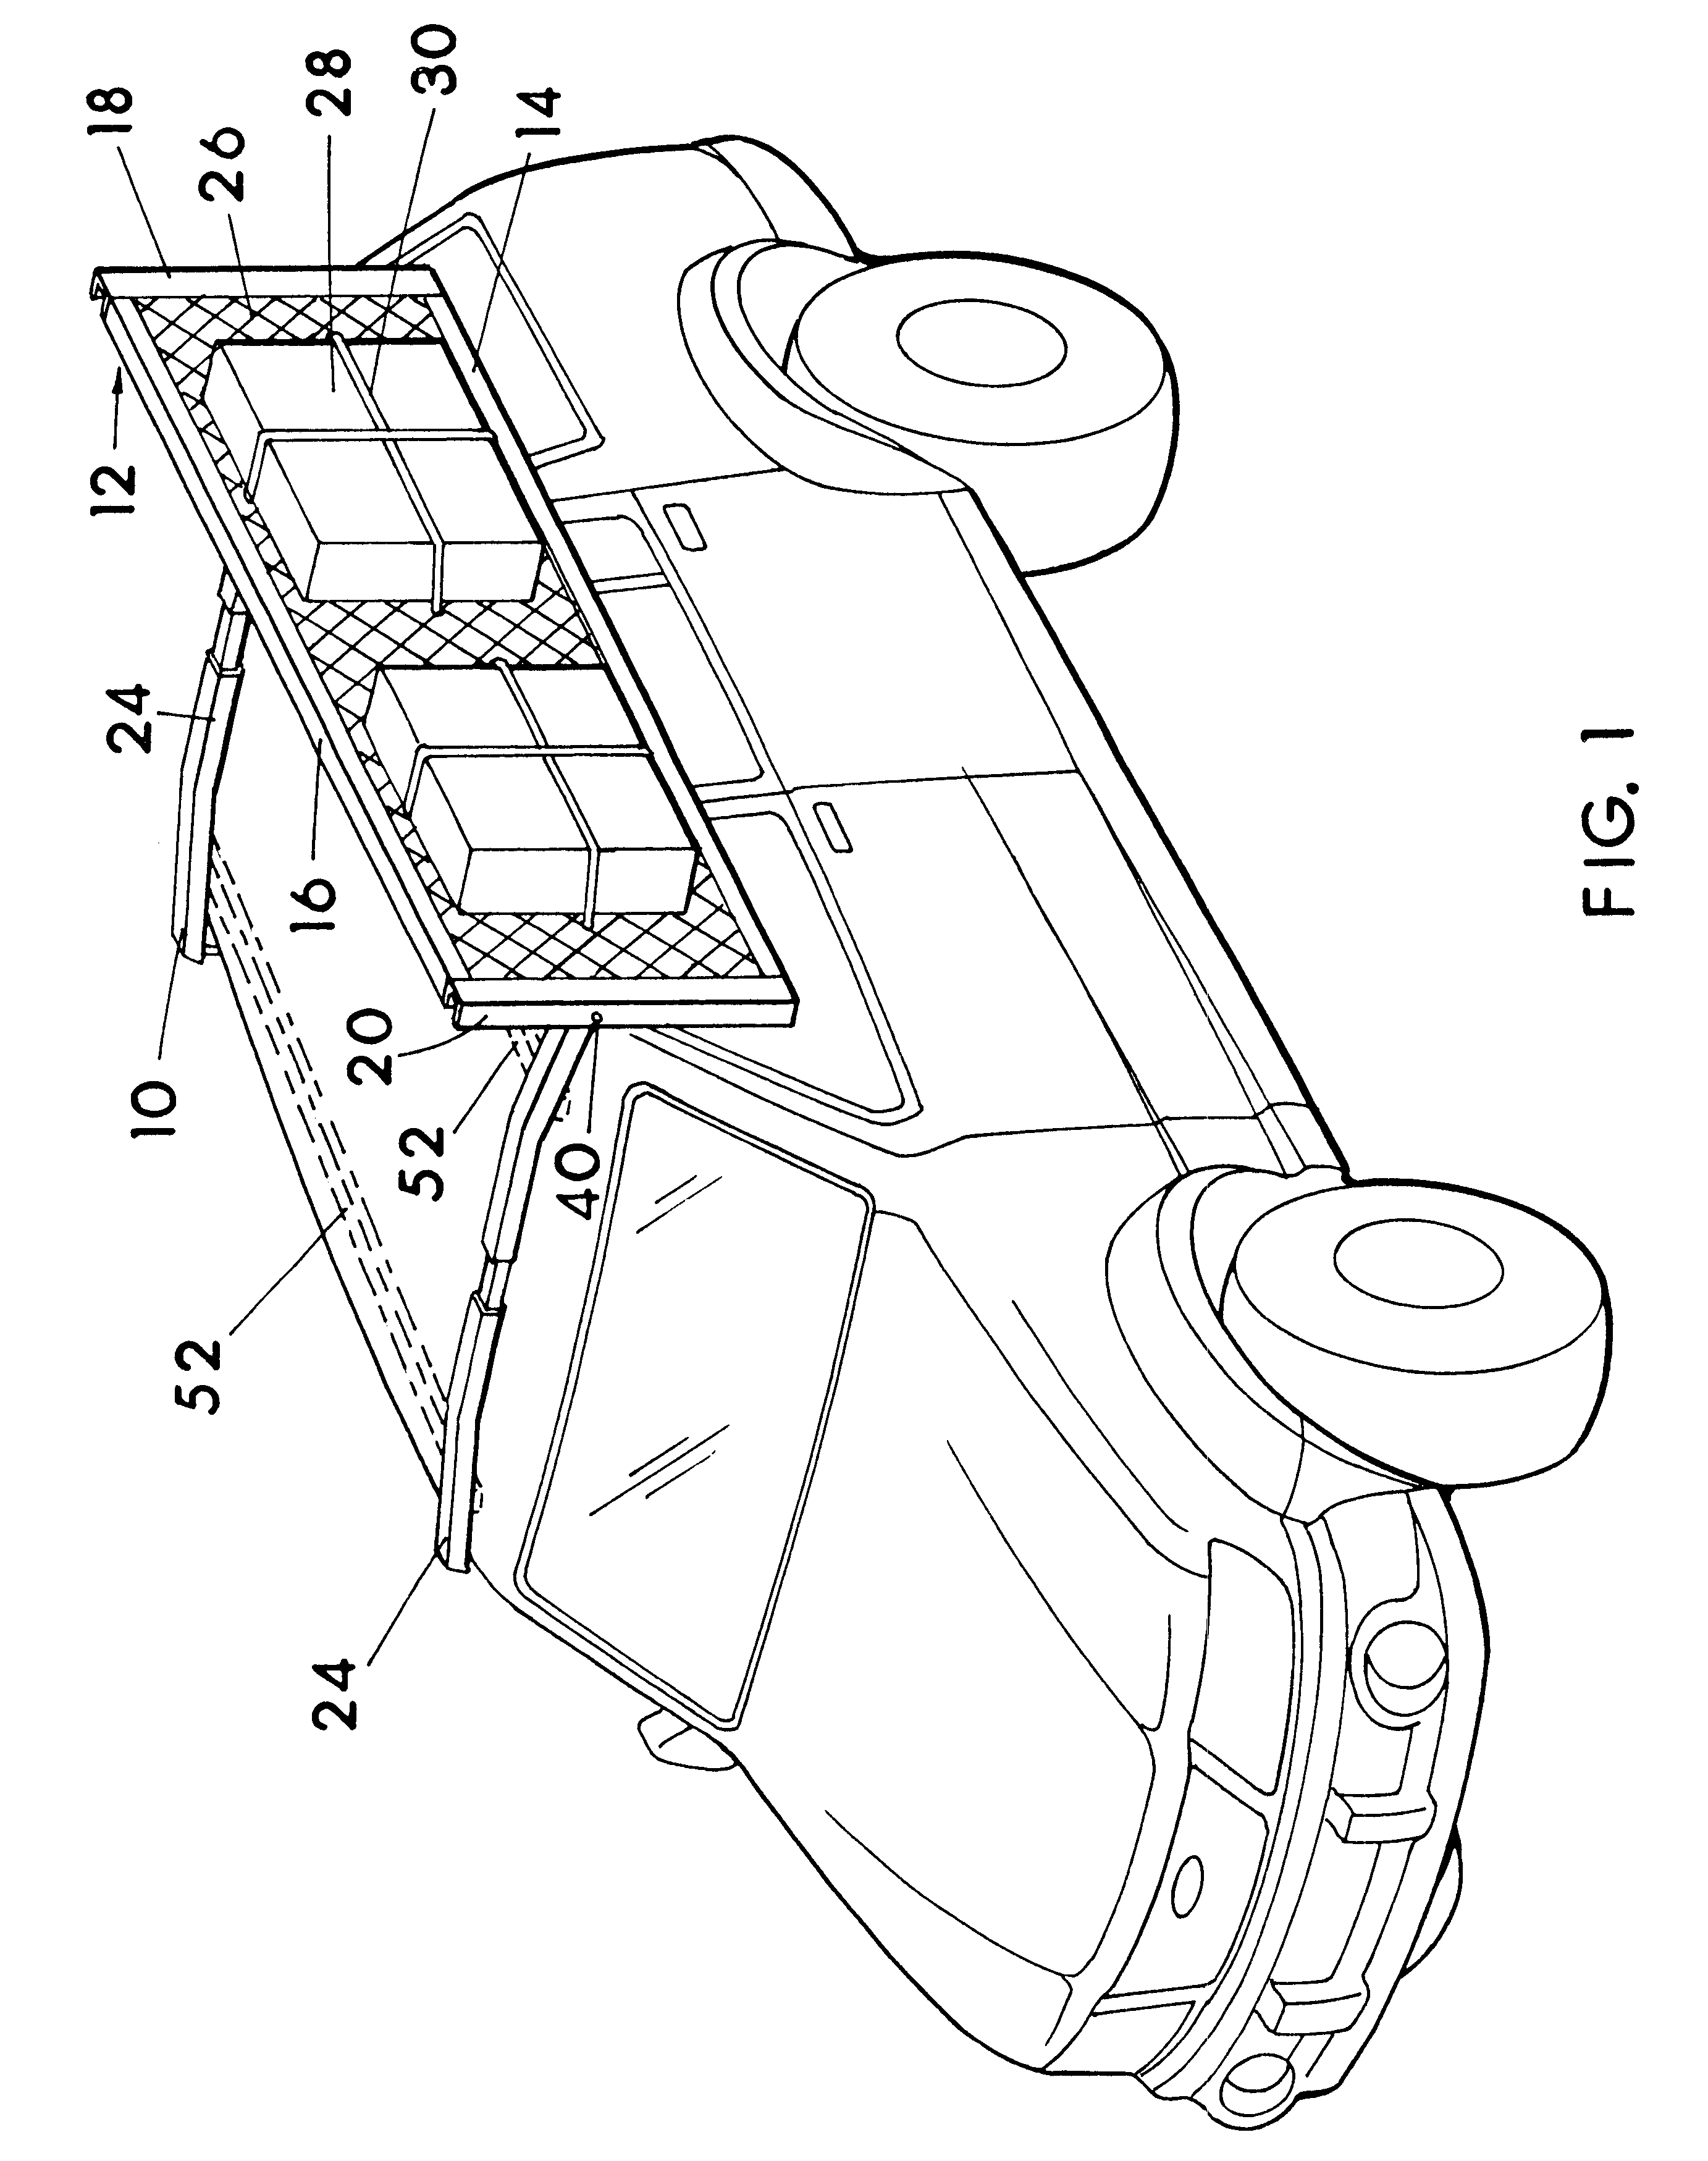 Tiltable rooftop cargo carrier for a vehicle